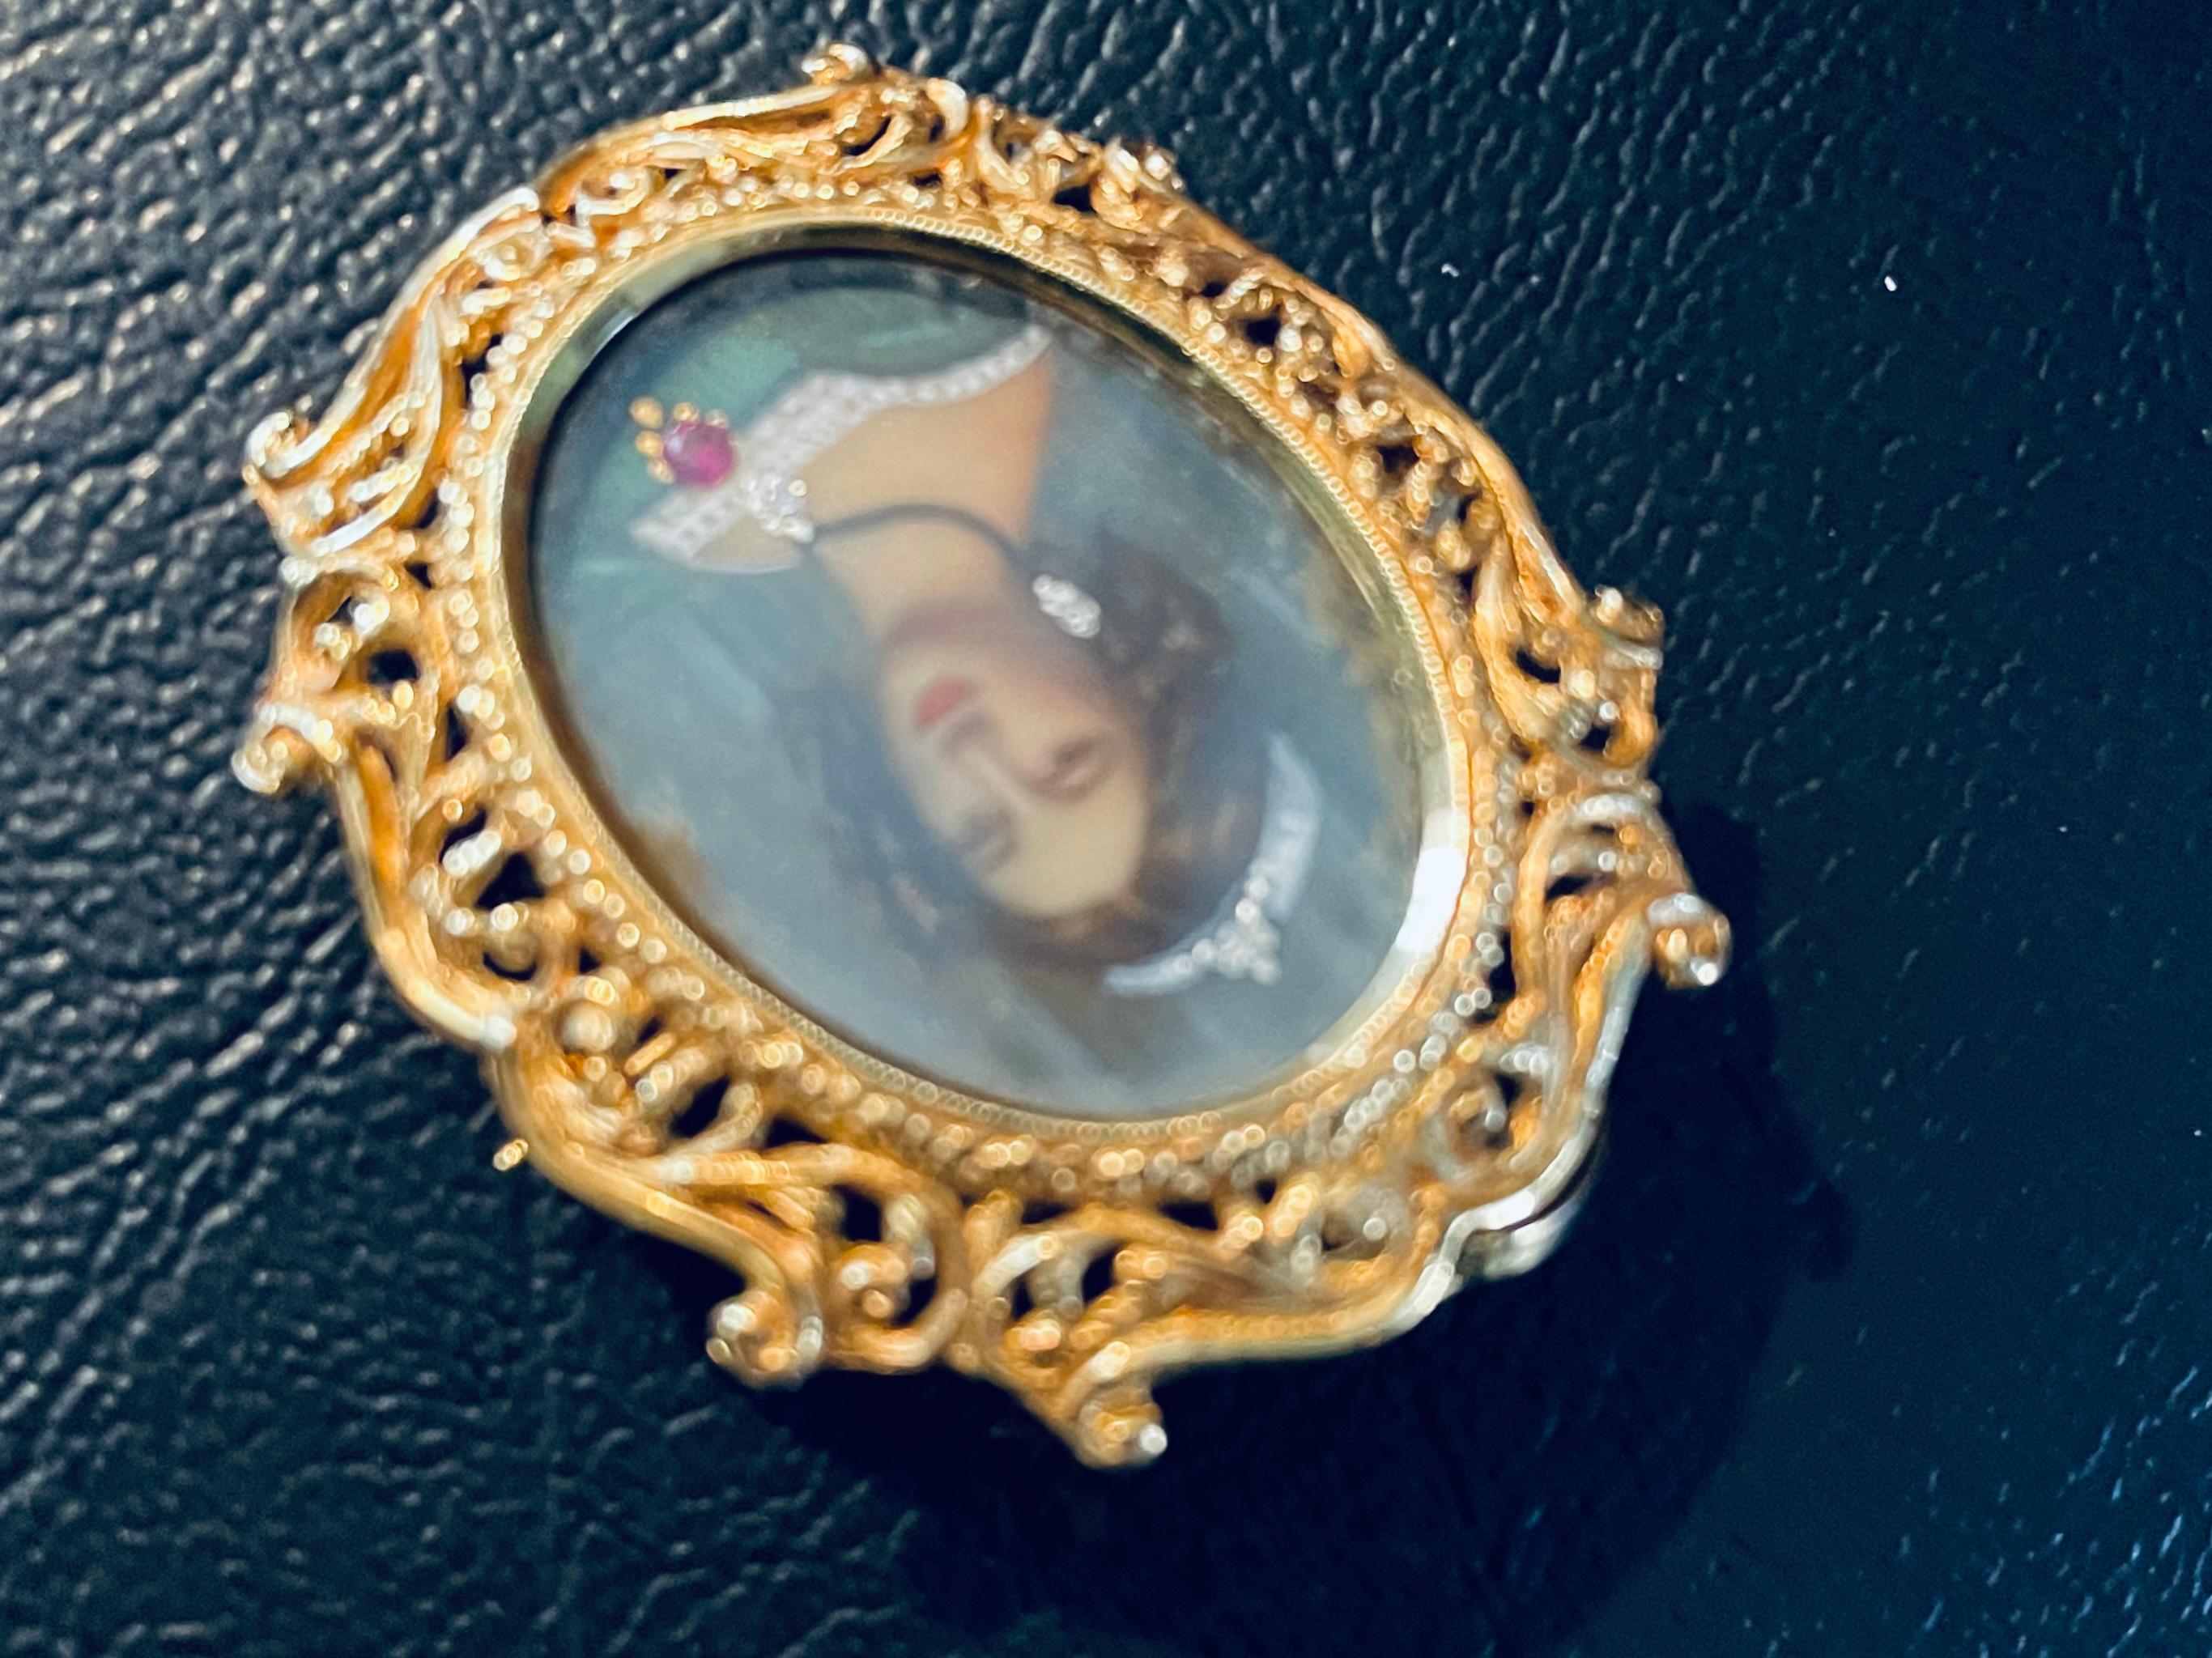 Italian 18K Gold Hand Painted Miniature Lady Portrait Brooch/Pendant  In Good Condition For Sale In Guaynabo, PR